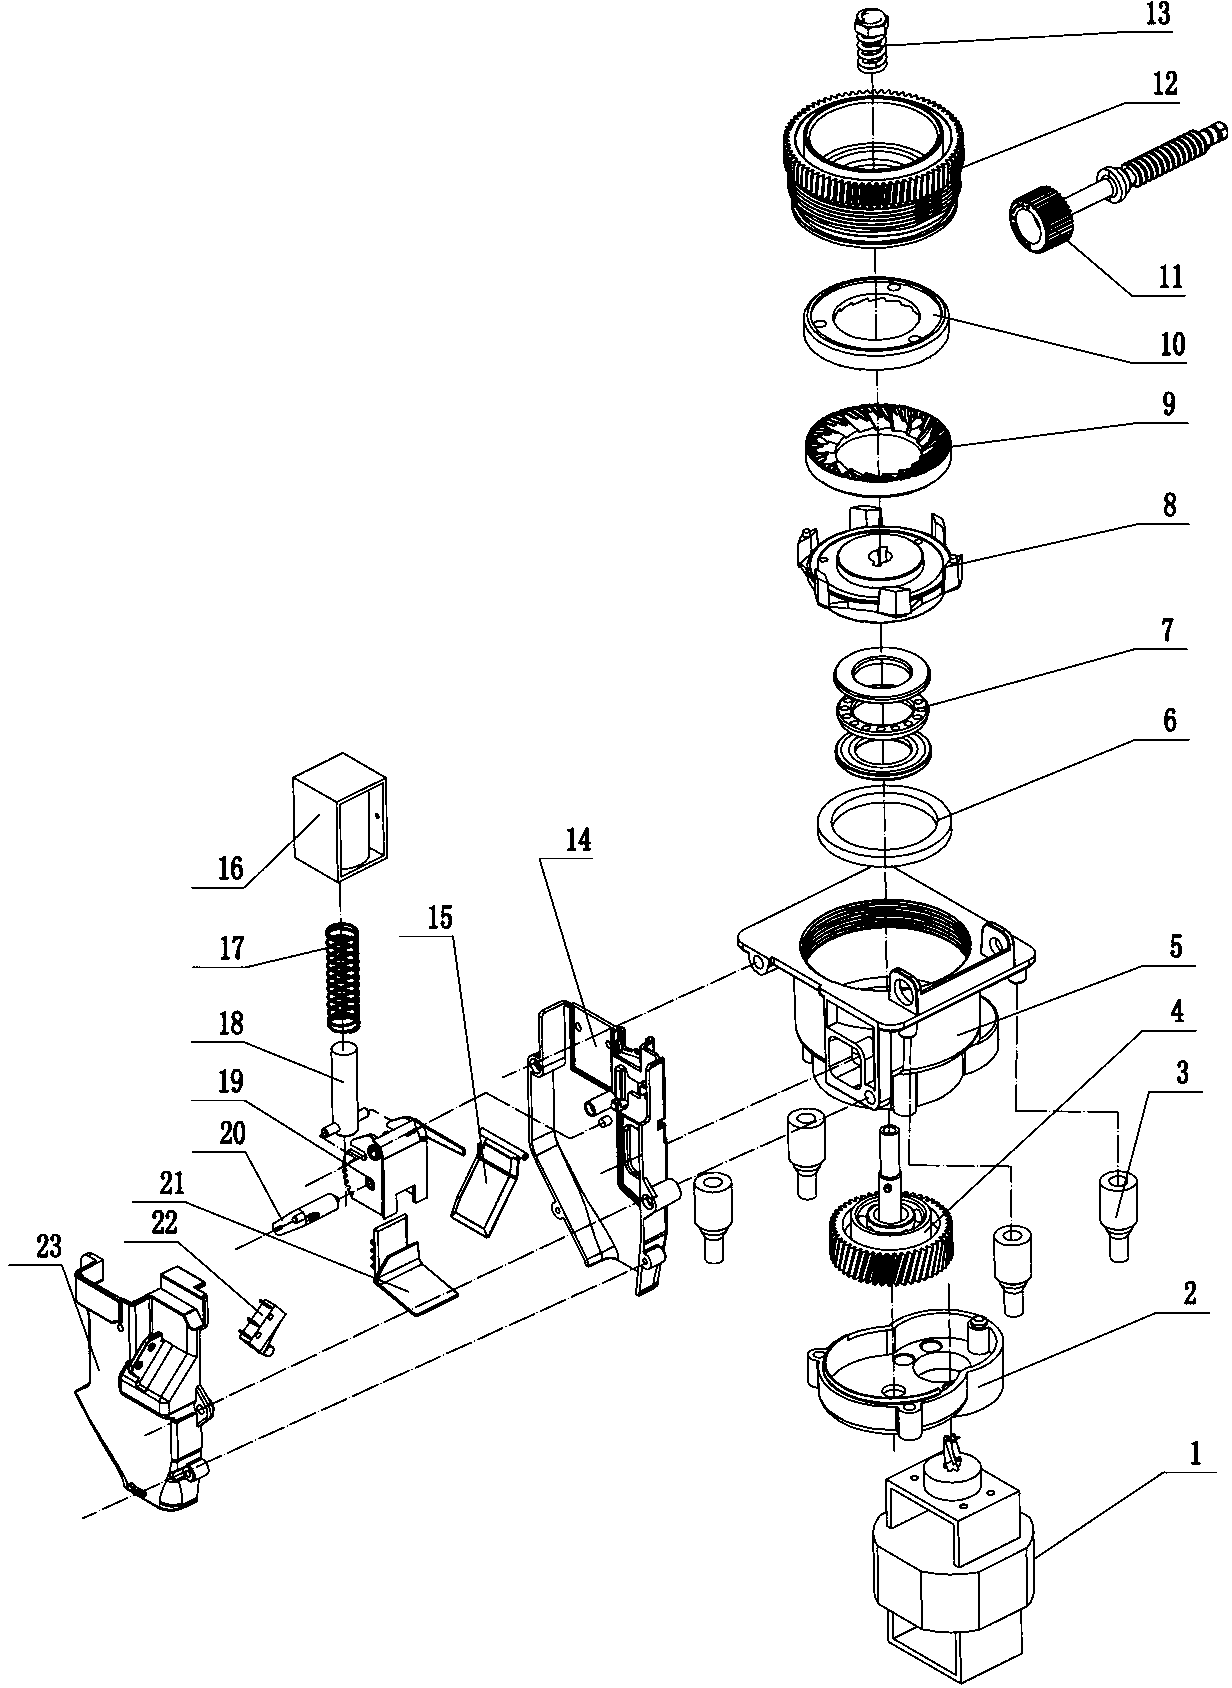 Bean grinding system of full-automatic coffee machine